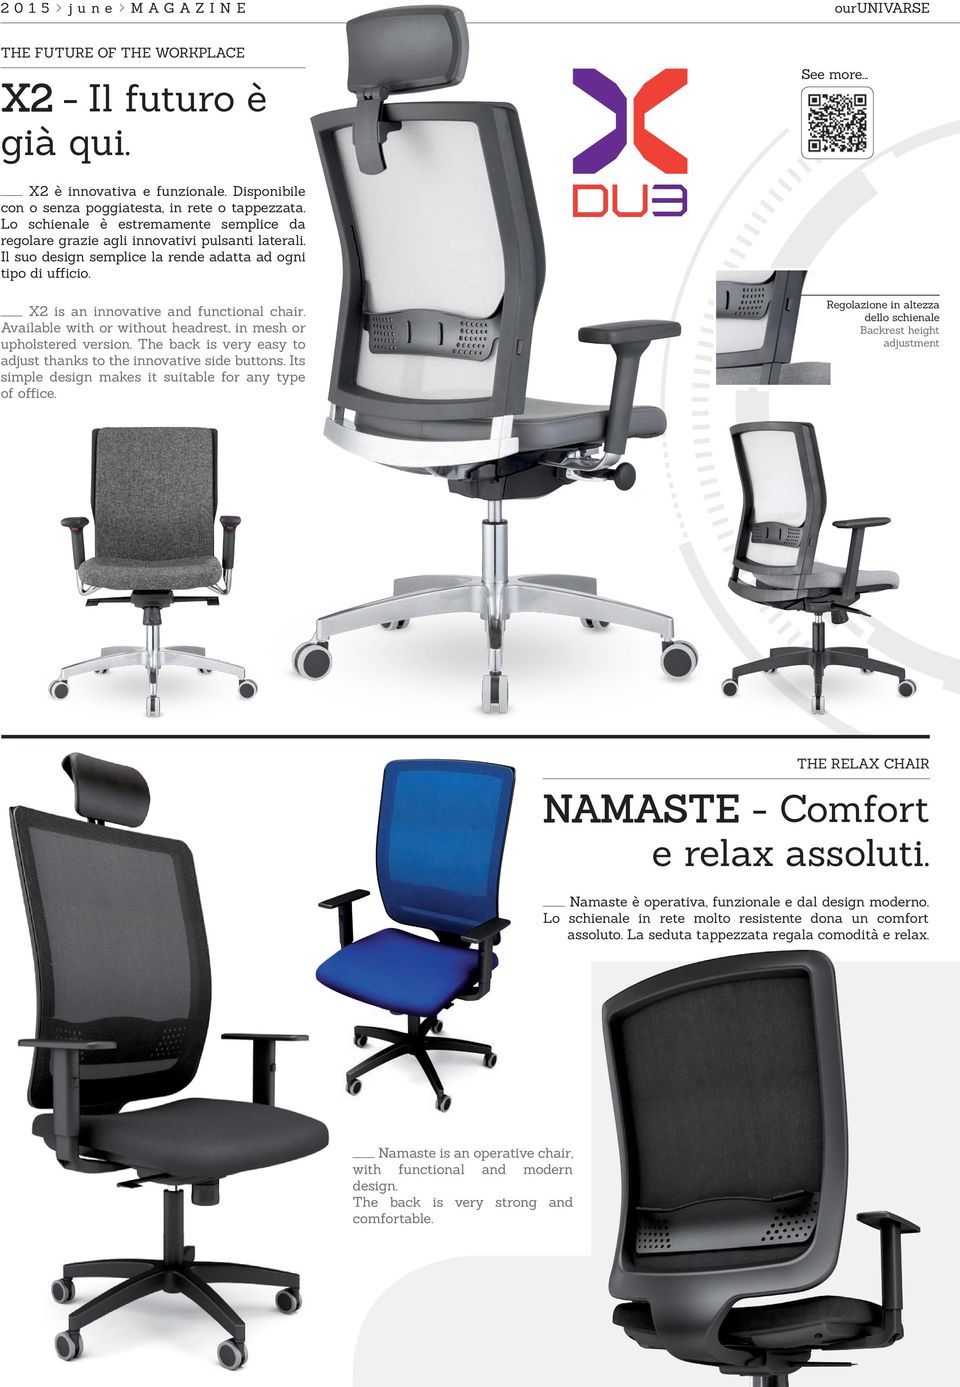 Available with or without headrest, in mesh or upholstered version. The back is very easy to adjust thanks to the innovative side buttons. Its simple design makes it suitable for any type of office.